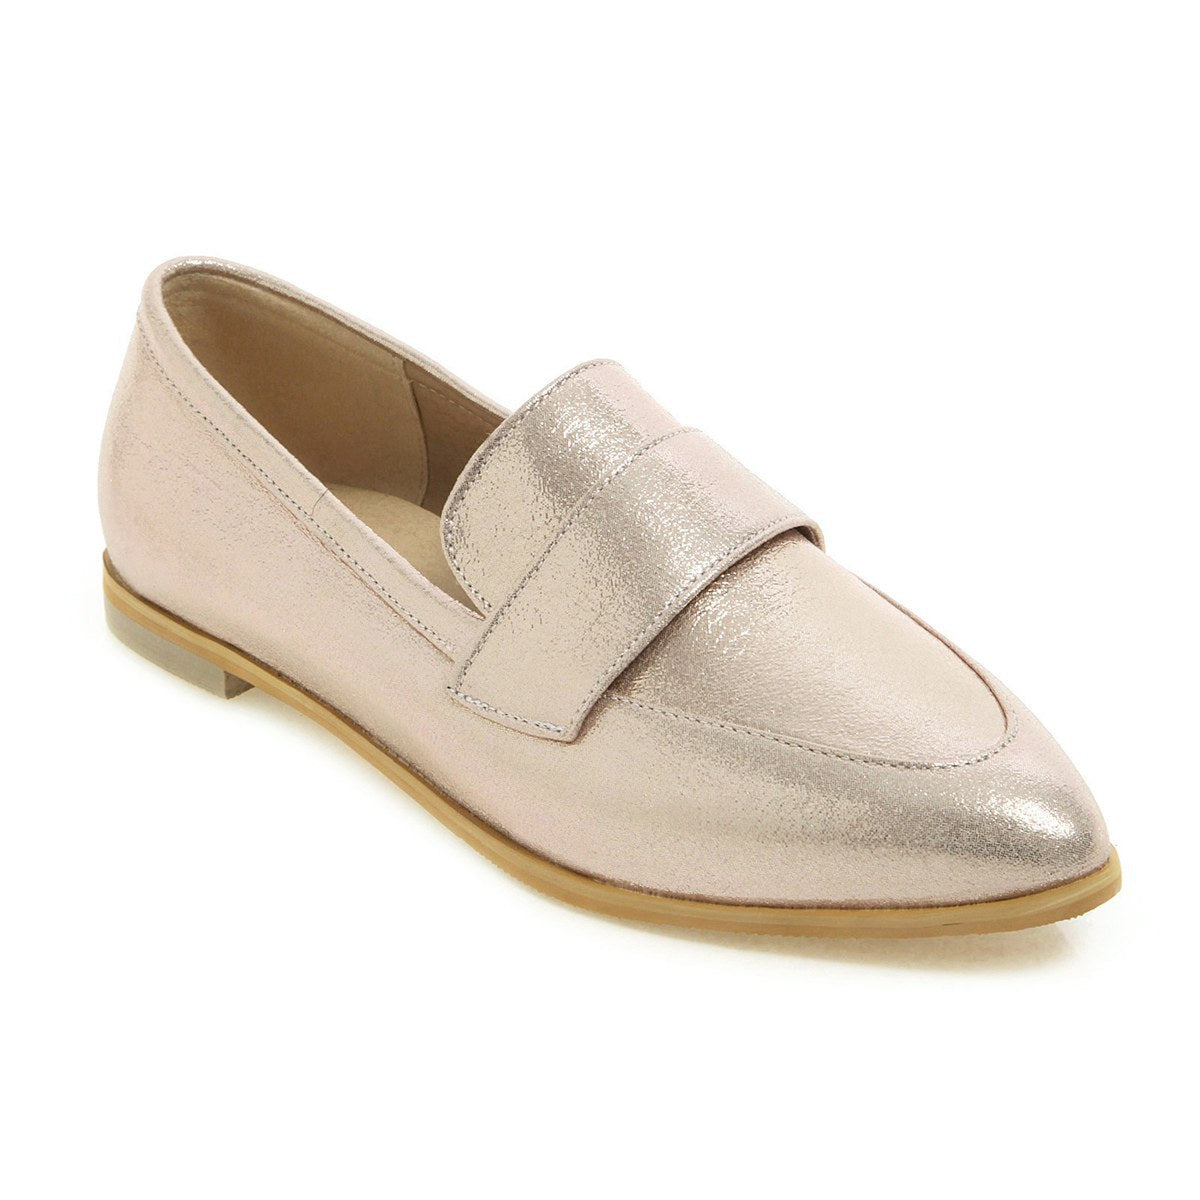 Sursell Womens Casual Elegant Pointed Toe Slip-On Loafer Office Shoes